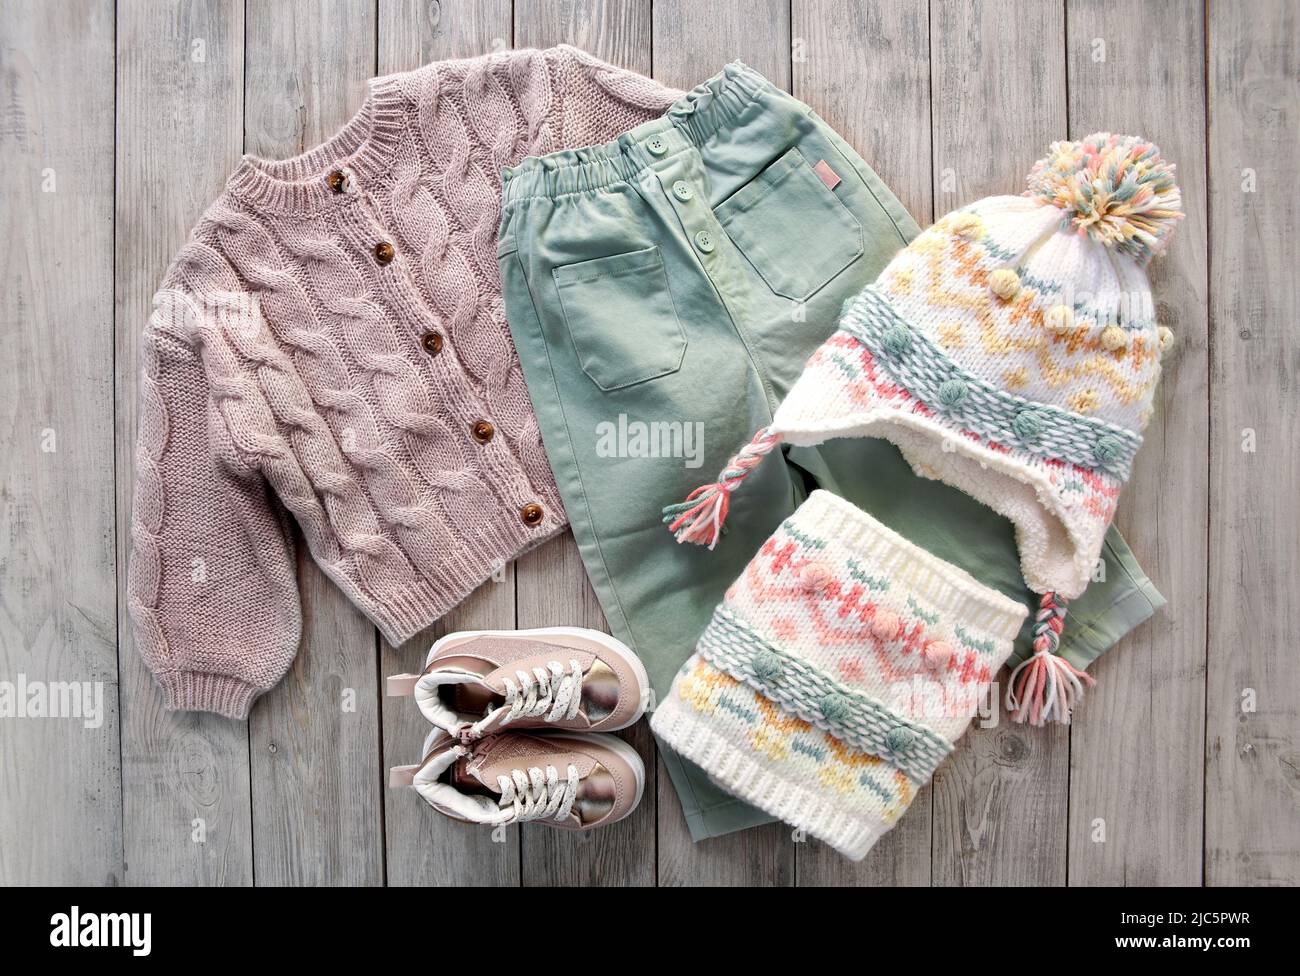 https://c8.alamy.com/comp/2JC5PWR/childs-girl-knitwear-set-on-wooden-background-flat-lay-kids-winter-woolen-clothes-top-view-toddler-knitted-cardiganpantshat-and-shoes-collectio-2JC5PWR.jpg